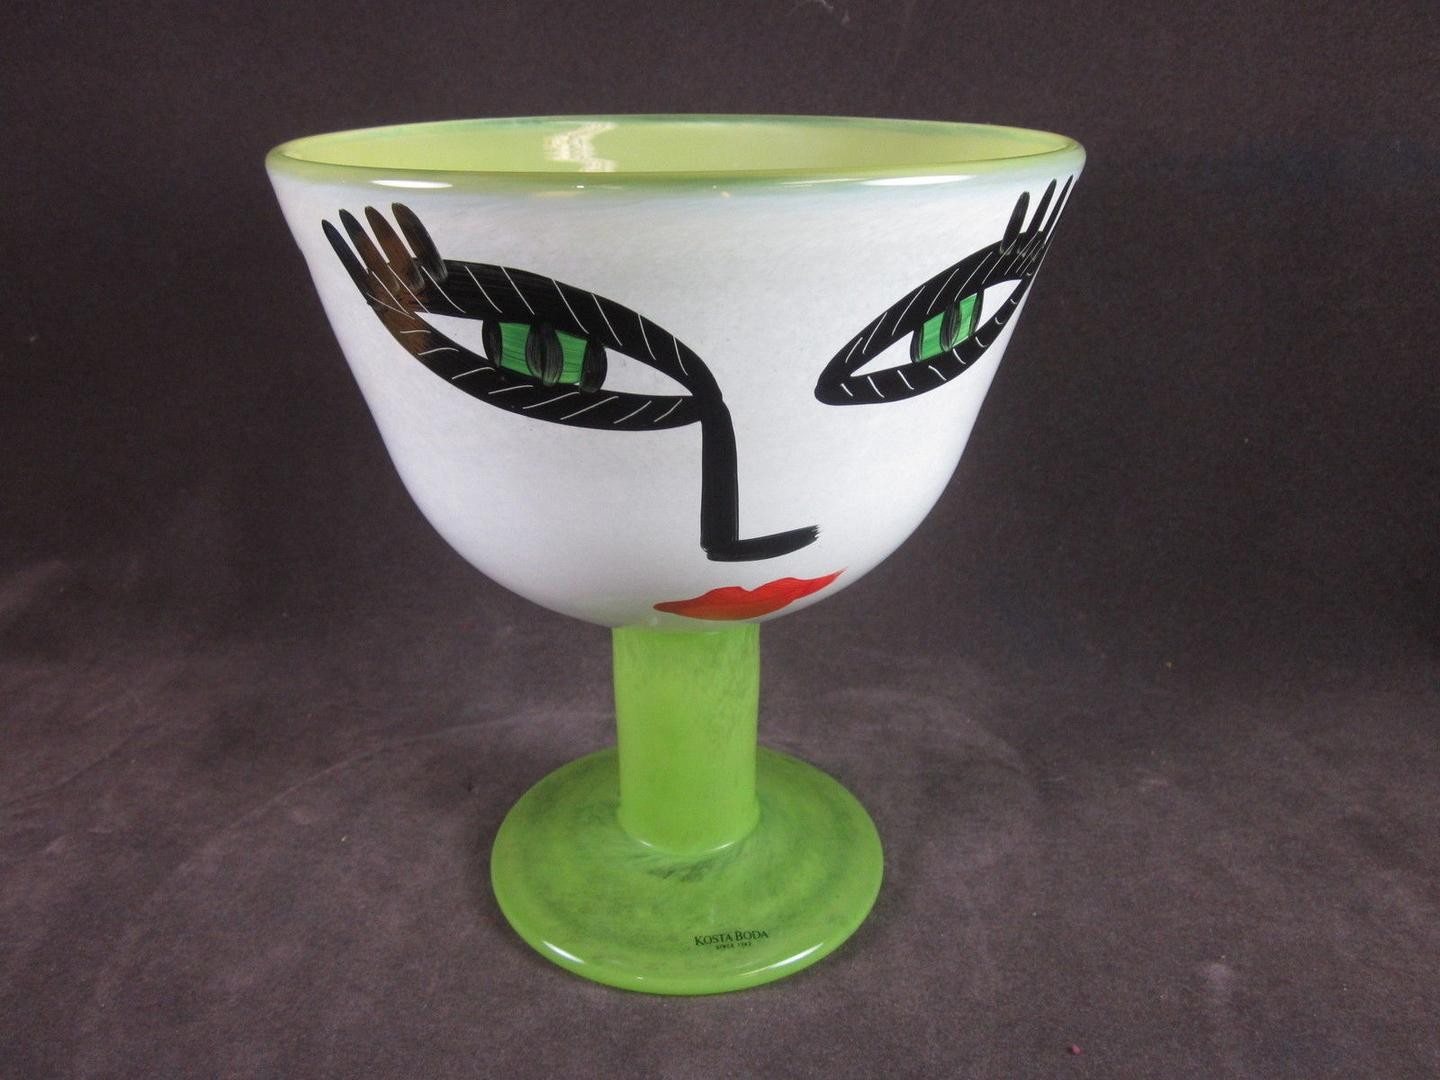 11 Unique Kosta Boda Face Vase 2024 free download kosta boda face vase of kosta boda open minds footed bowl with ladies face ulrica hydman within previous